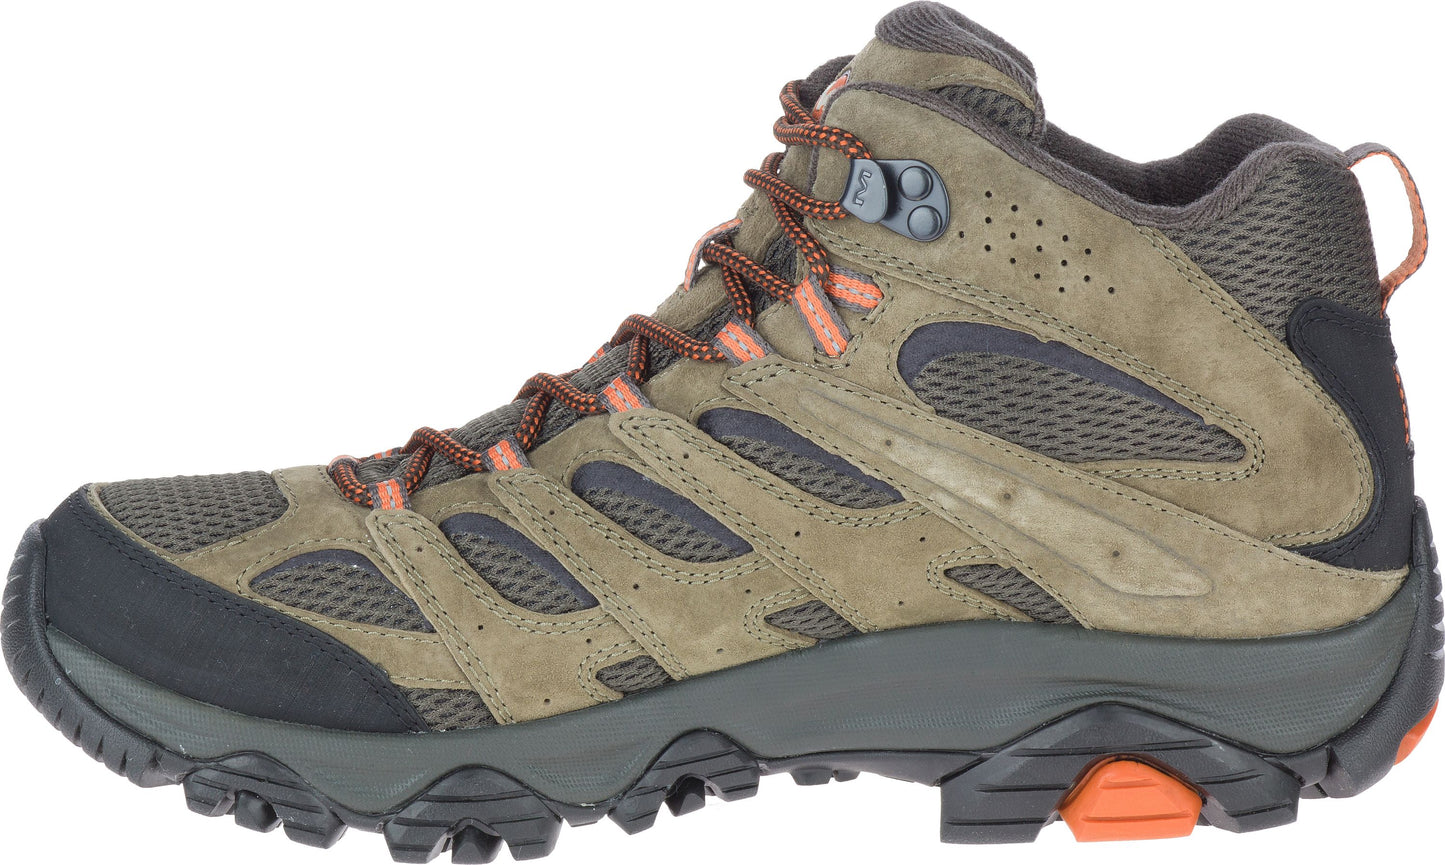 Merrell Shoes Moab 3 Mid Waterproof Olive